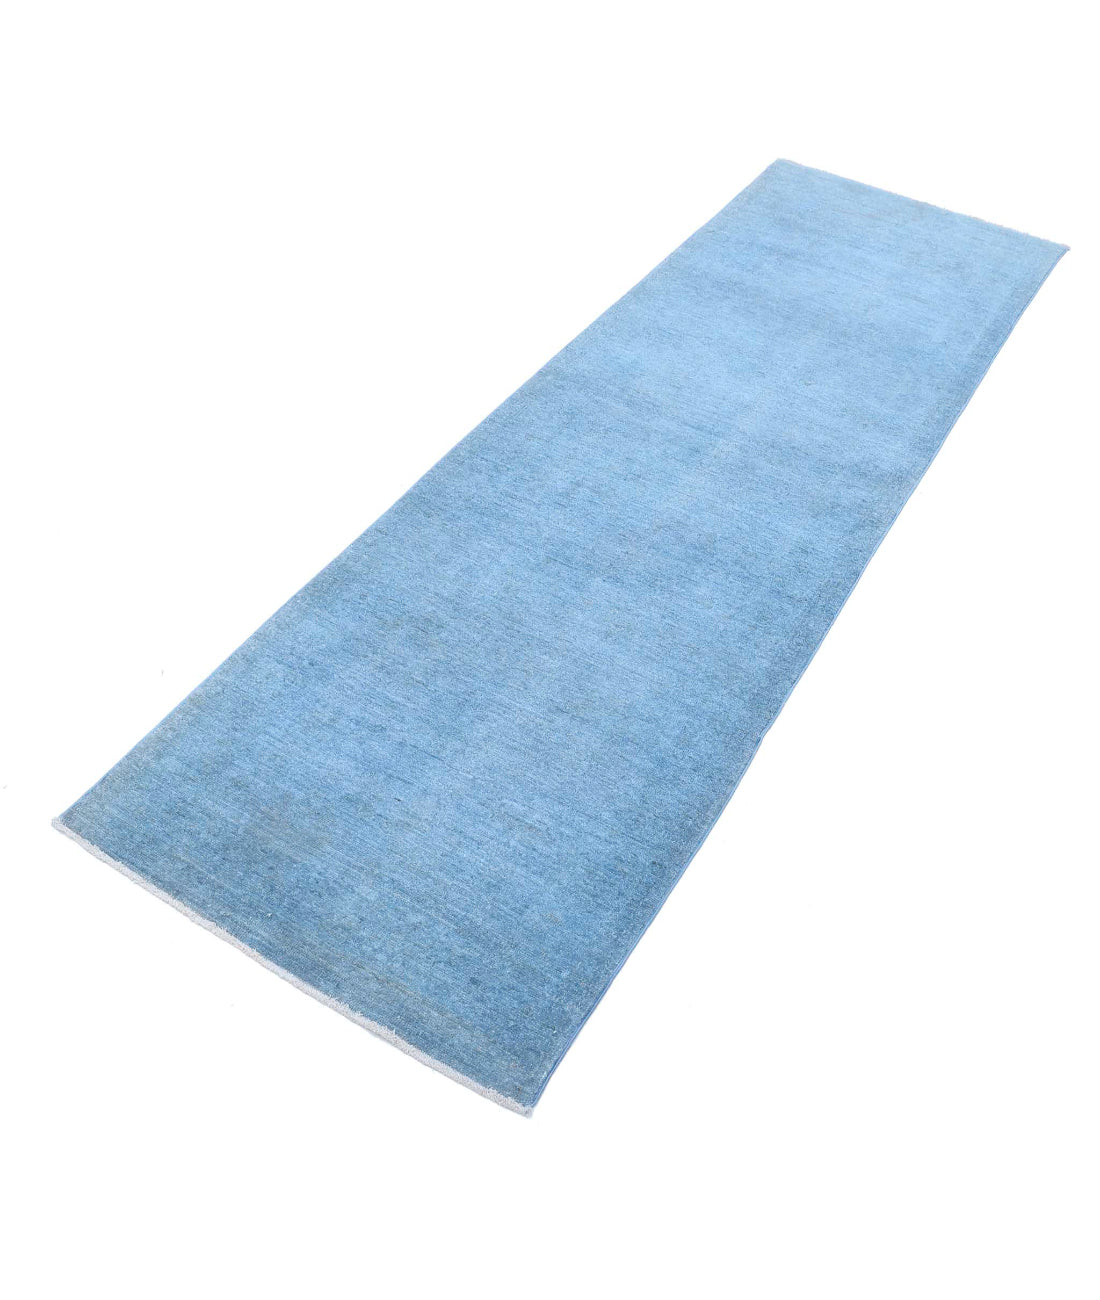 Overdye 2'6'' X 8'2'' Hand-Knotted Wool Rug 2'6'' x 8'2'' (75 X 245) / Blue / N/A